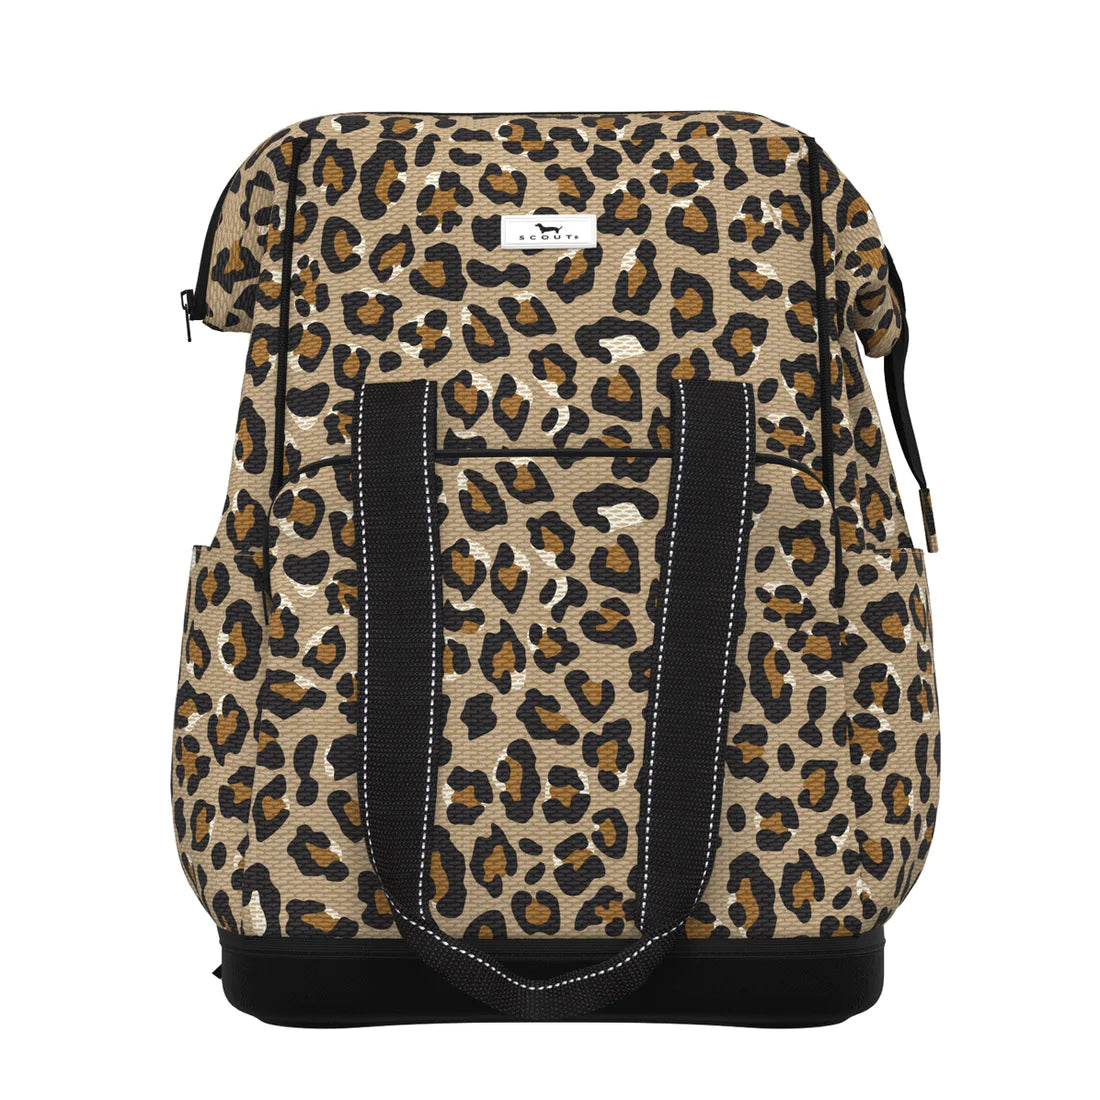 Scout Play It Cool Backpack Cooler Bag - Cindy Crawford